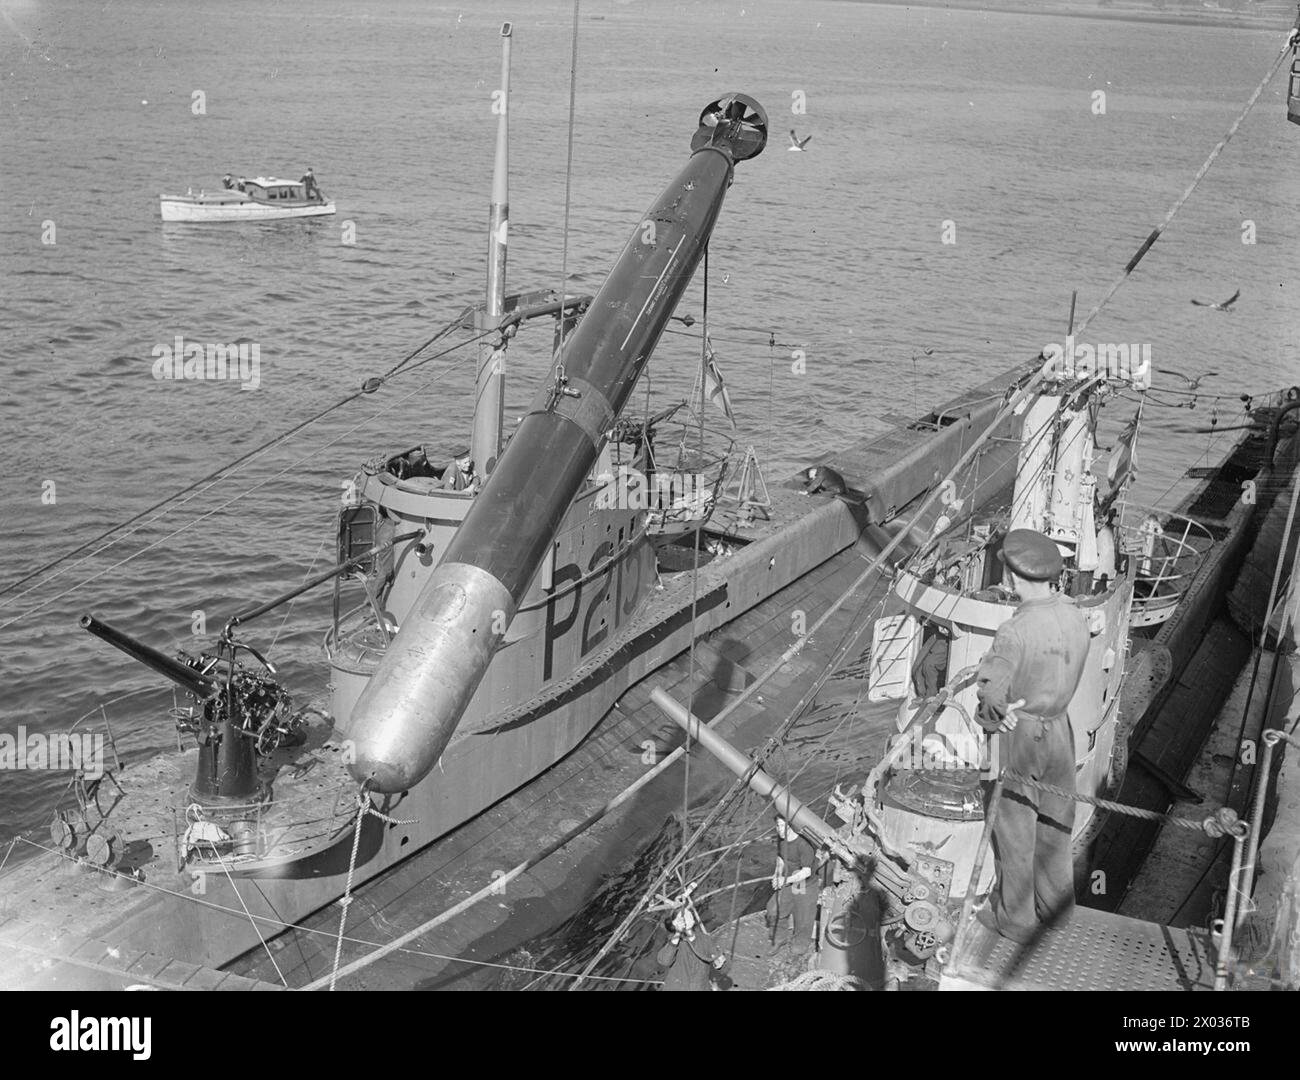 BRITISH SUBMARINES PREPARE FOR PATROL. 18 JULY 1943, HMS FORTH, HOLY LOCH. - Loading torpedoes into a submarine. (HMS SCEPTRE?) , Stock Photo